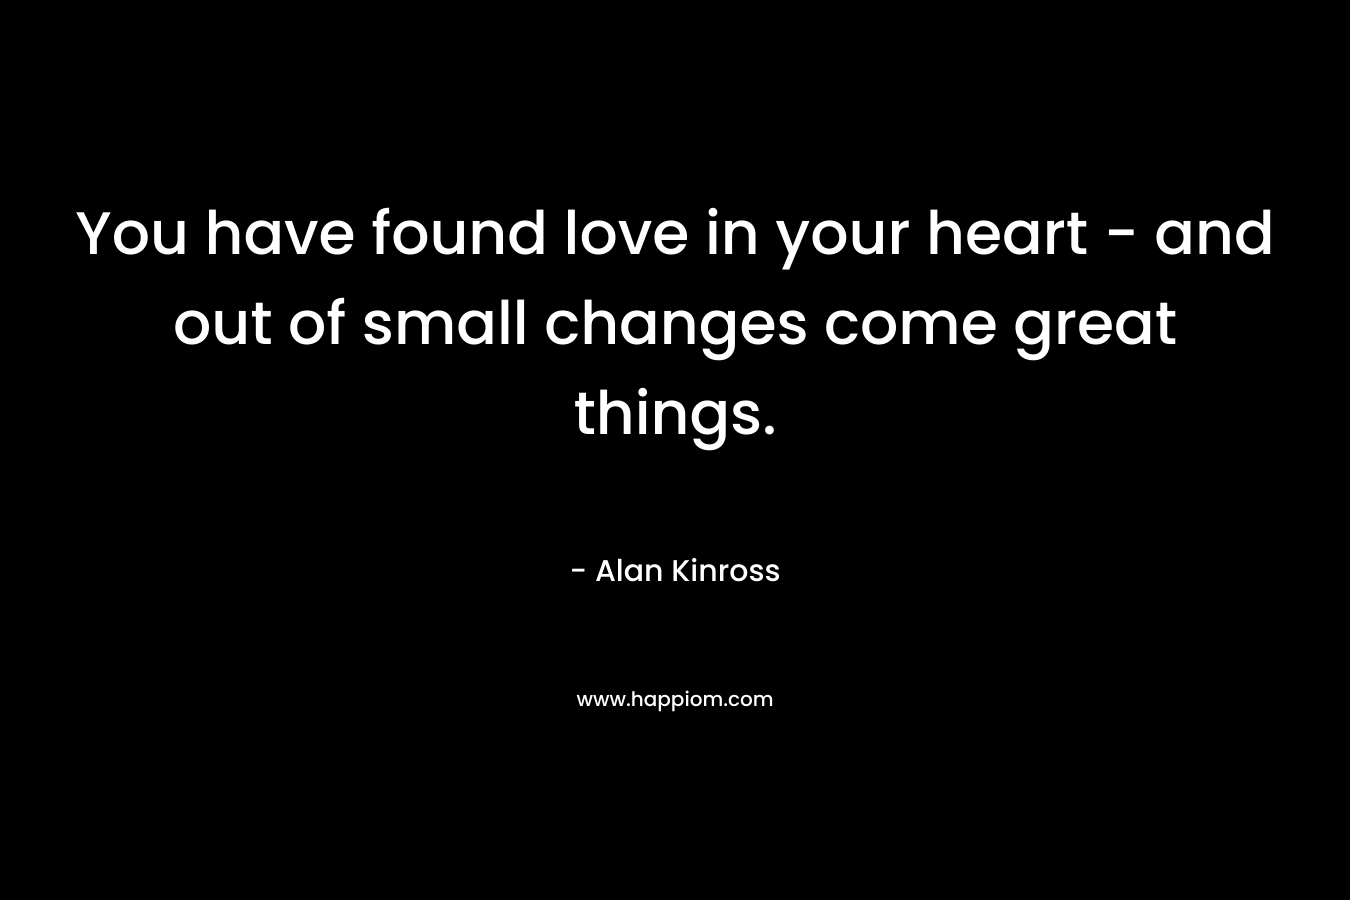 You have found love in your heart - and out of small changes come great things.